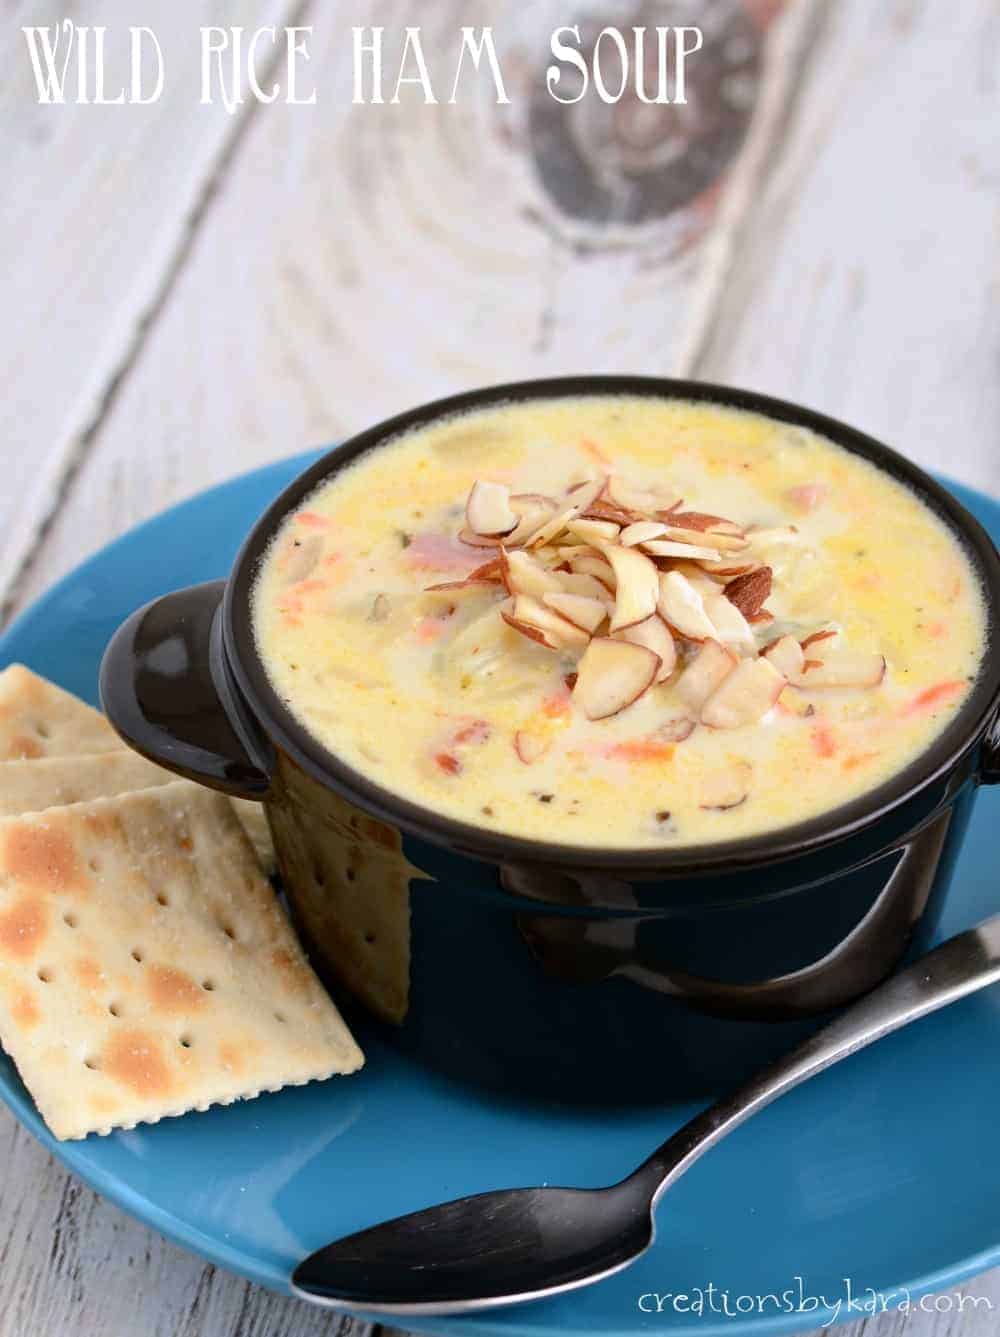 This Wild Rice Ham Soup comes together in minutes, and it is such a delicious soup recipe! The whole family loves it!